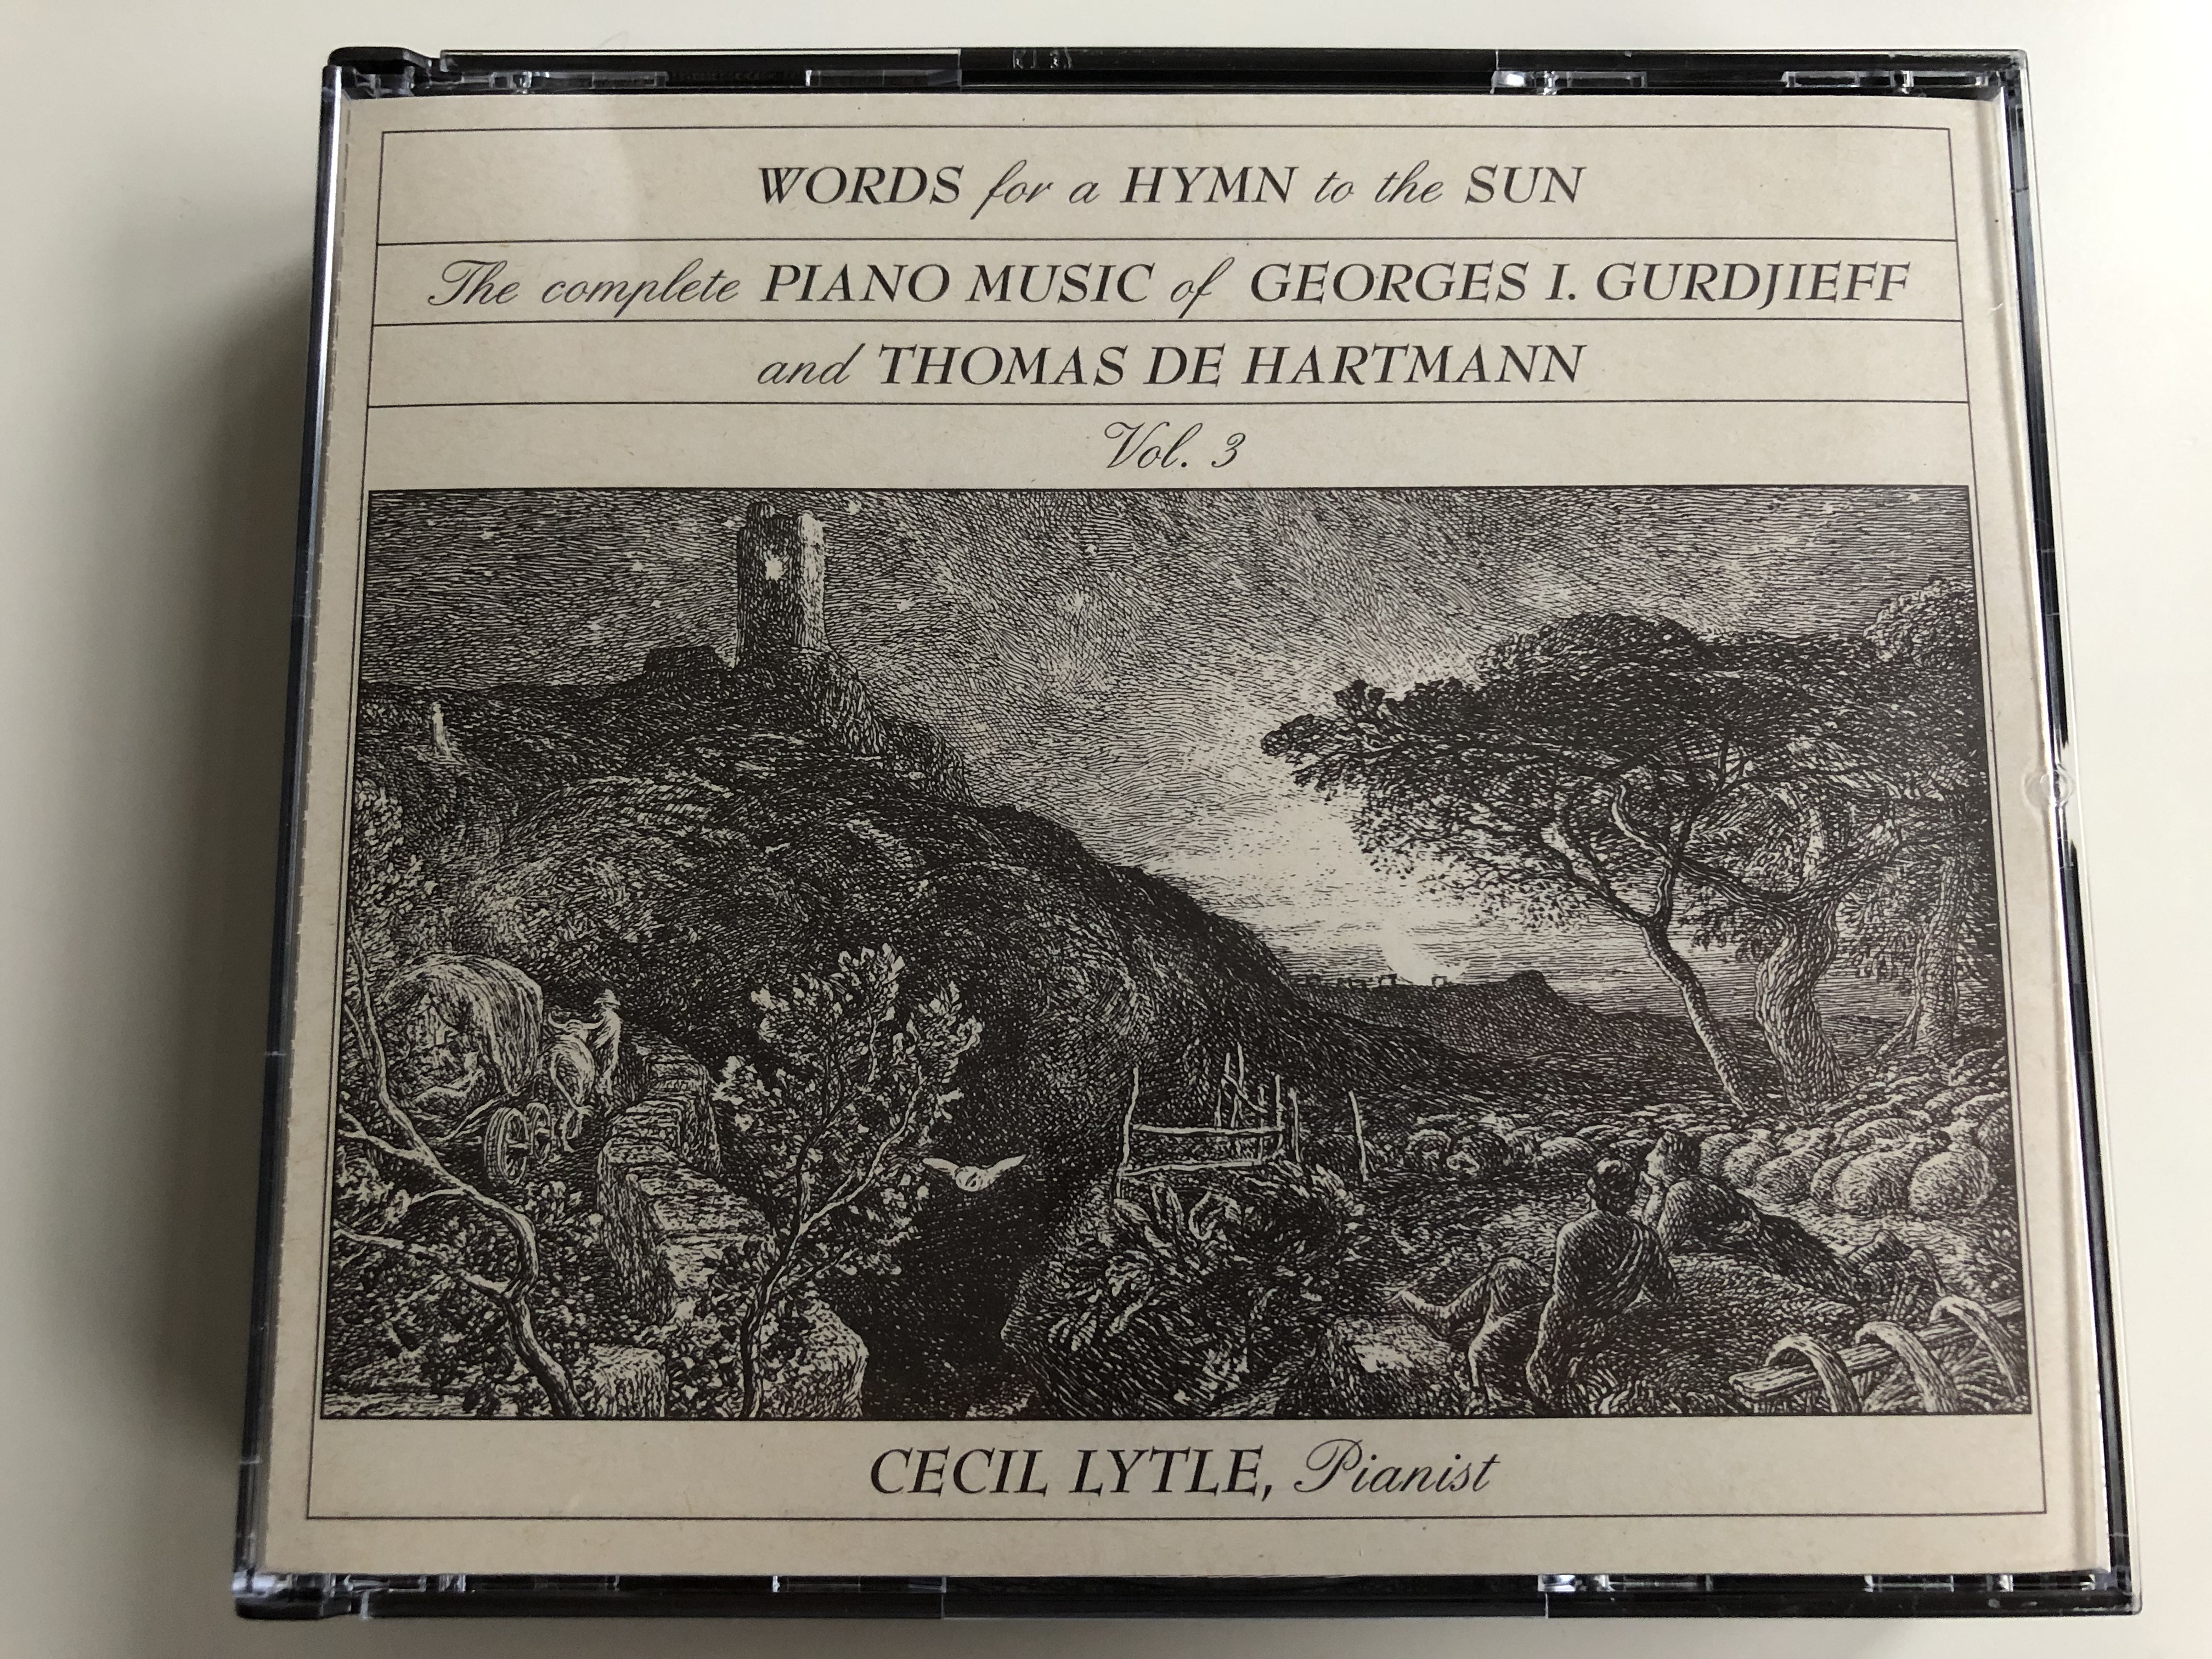 words-for-a-hymn-to-the-sun-the-complete-piano-music-of-georges-i.-gurdjieff-and-thomas-de-hartmann-vol.3-pianist-cecil-lytle-celestial-harmonies-2x-audio-cd-1990-14035-2-1-.jpg